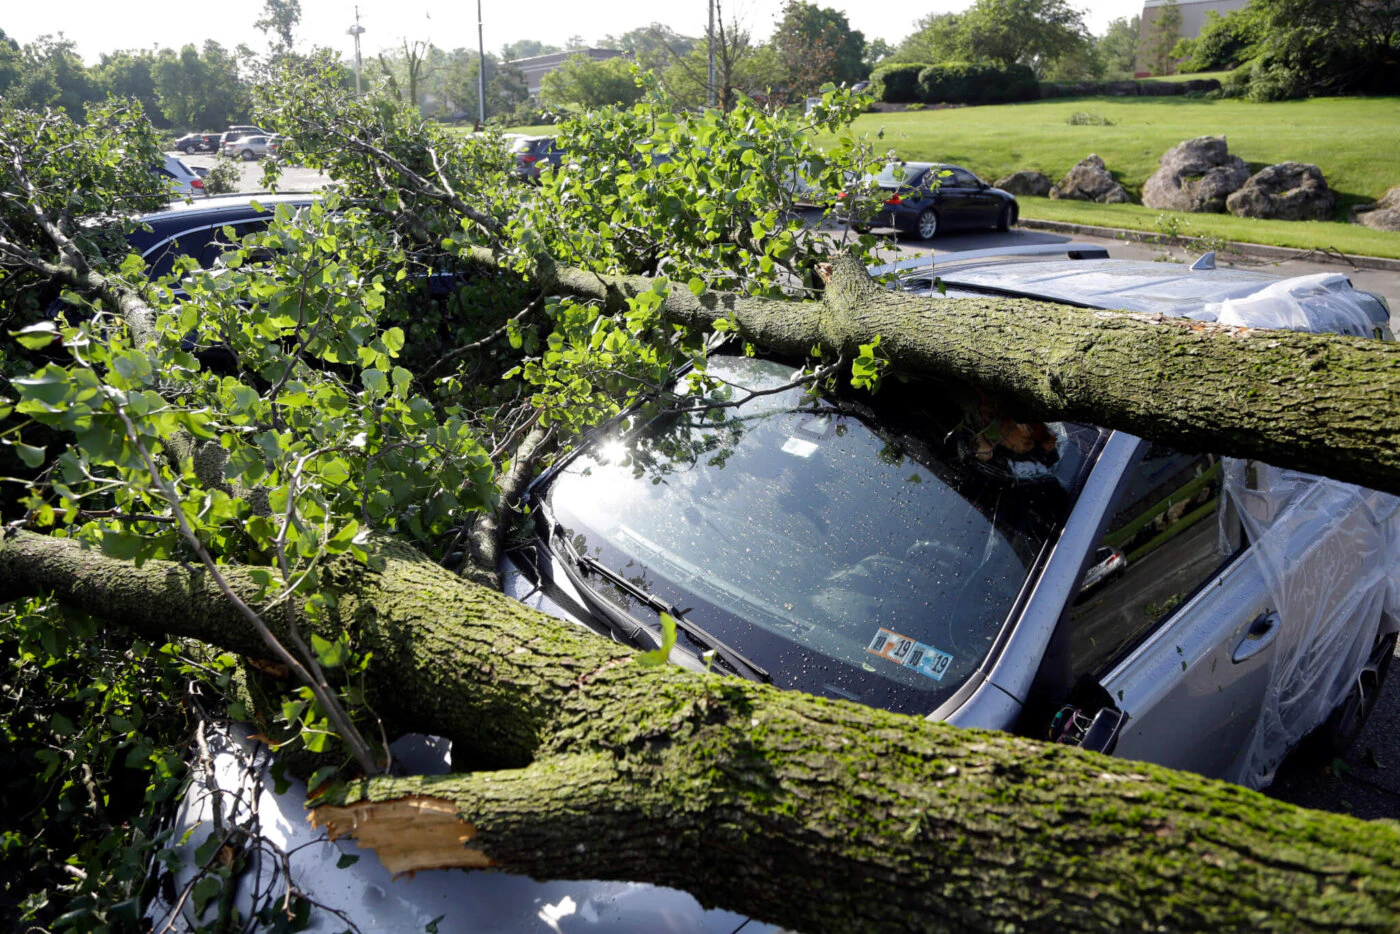 Downed tree limbs remain on cars outside a business Wednesday, May 29, 2019, in Morgantown, Pa. The National Weather Service says a tornado has been confirmed Tuesday in eastern Pennsylvania, where damage to some homes and businesses occurred, but there were no immediate reports of injuries. (AP Photo/Jacqueline Larma)